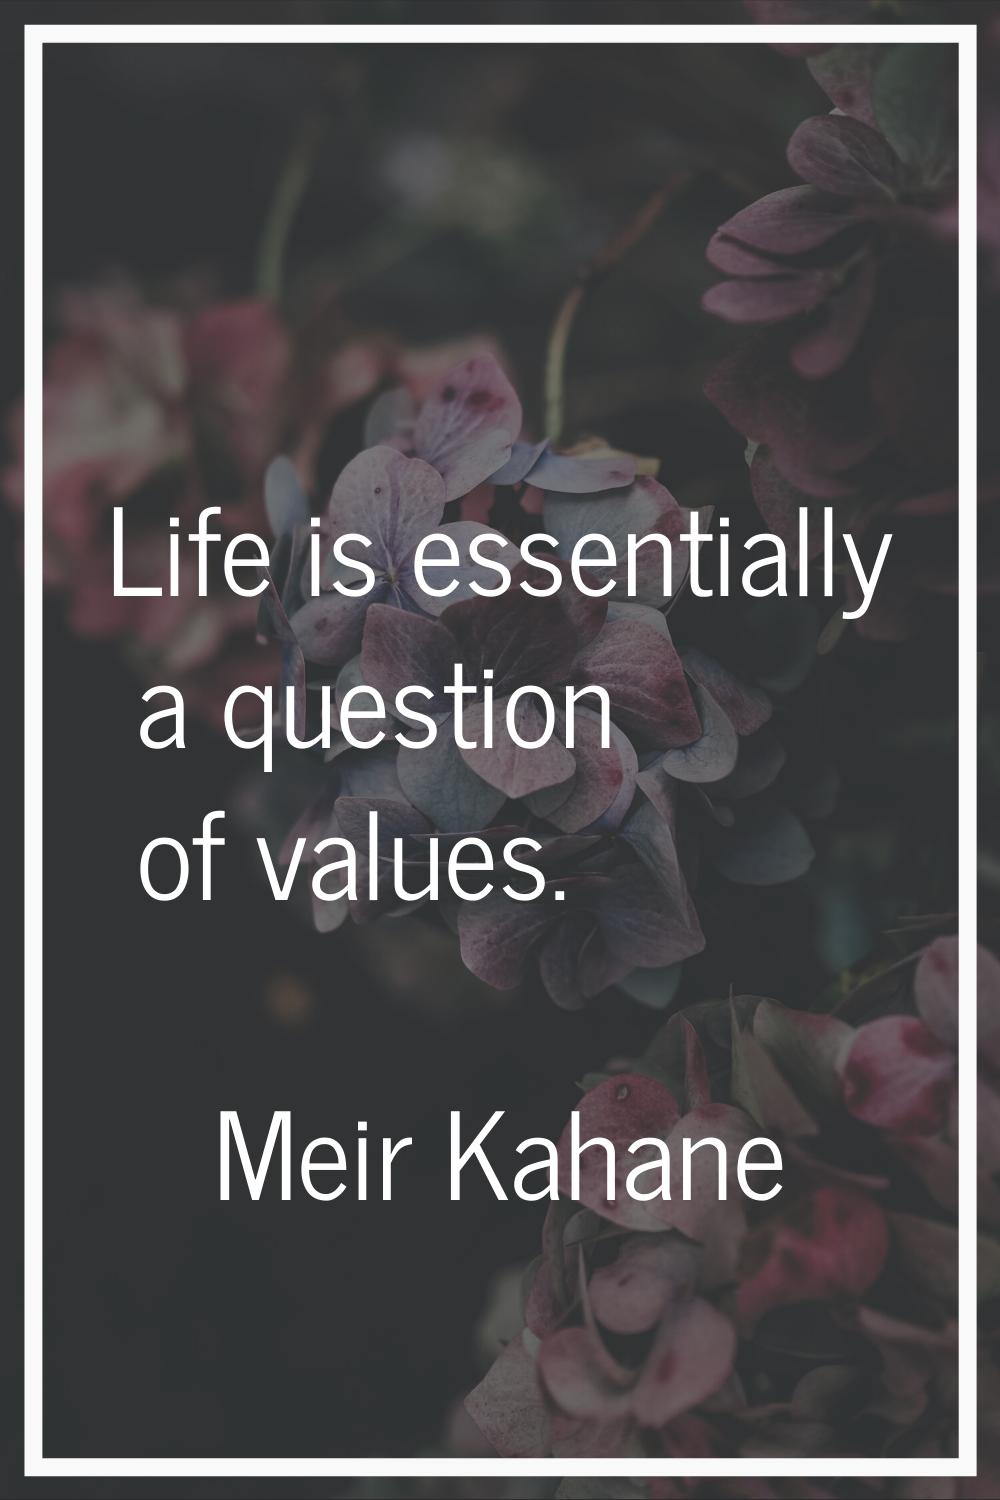 Life is essentially a question of values.